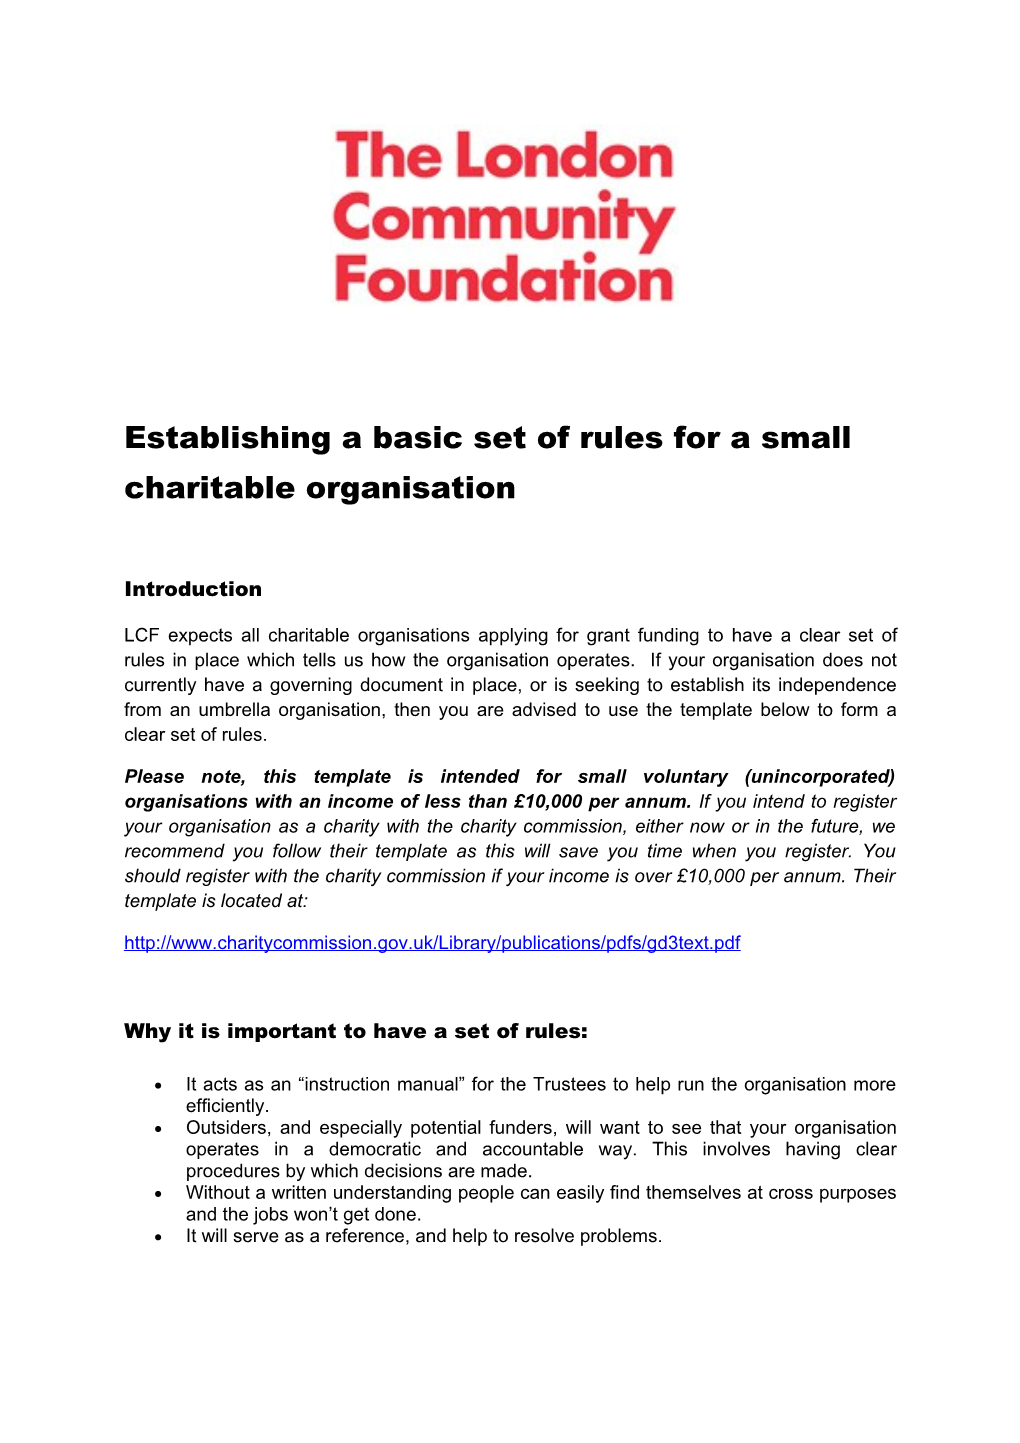 Establishing a Basic Set of Rules for a Small Charitable Organisation